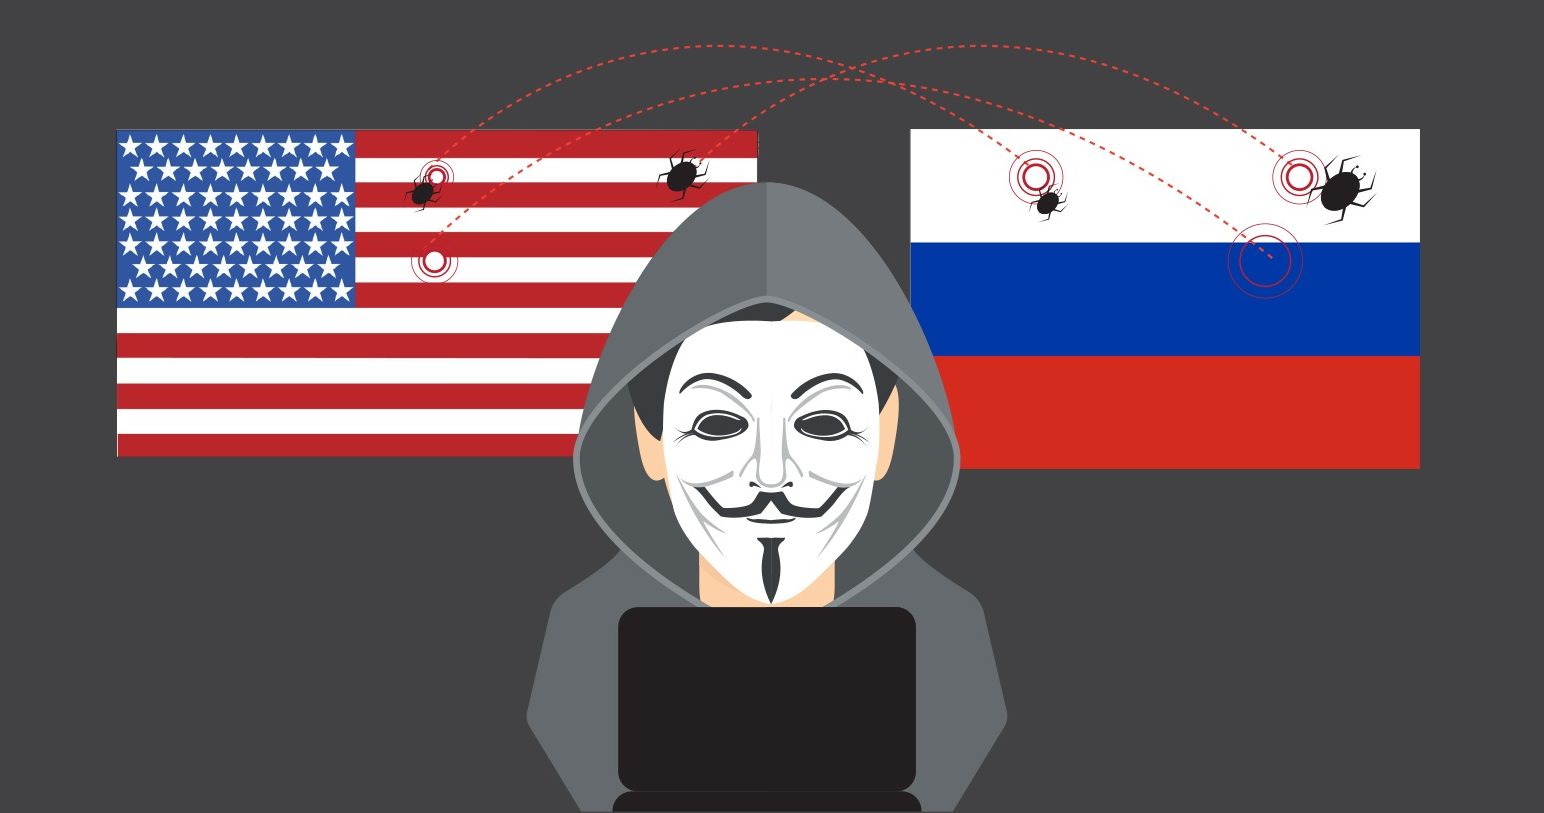 Cyber-war: The United States accuse Russia of large scale attacks